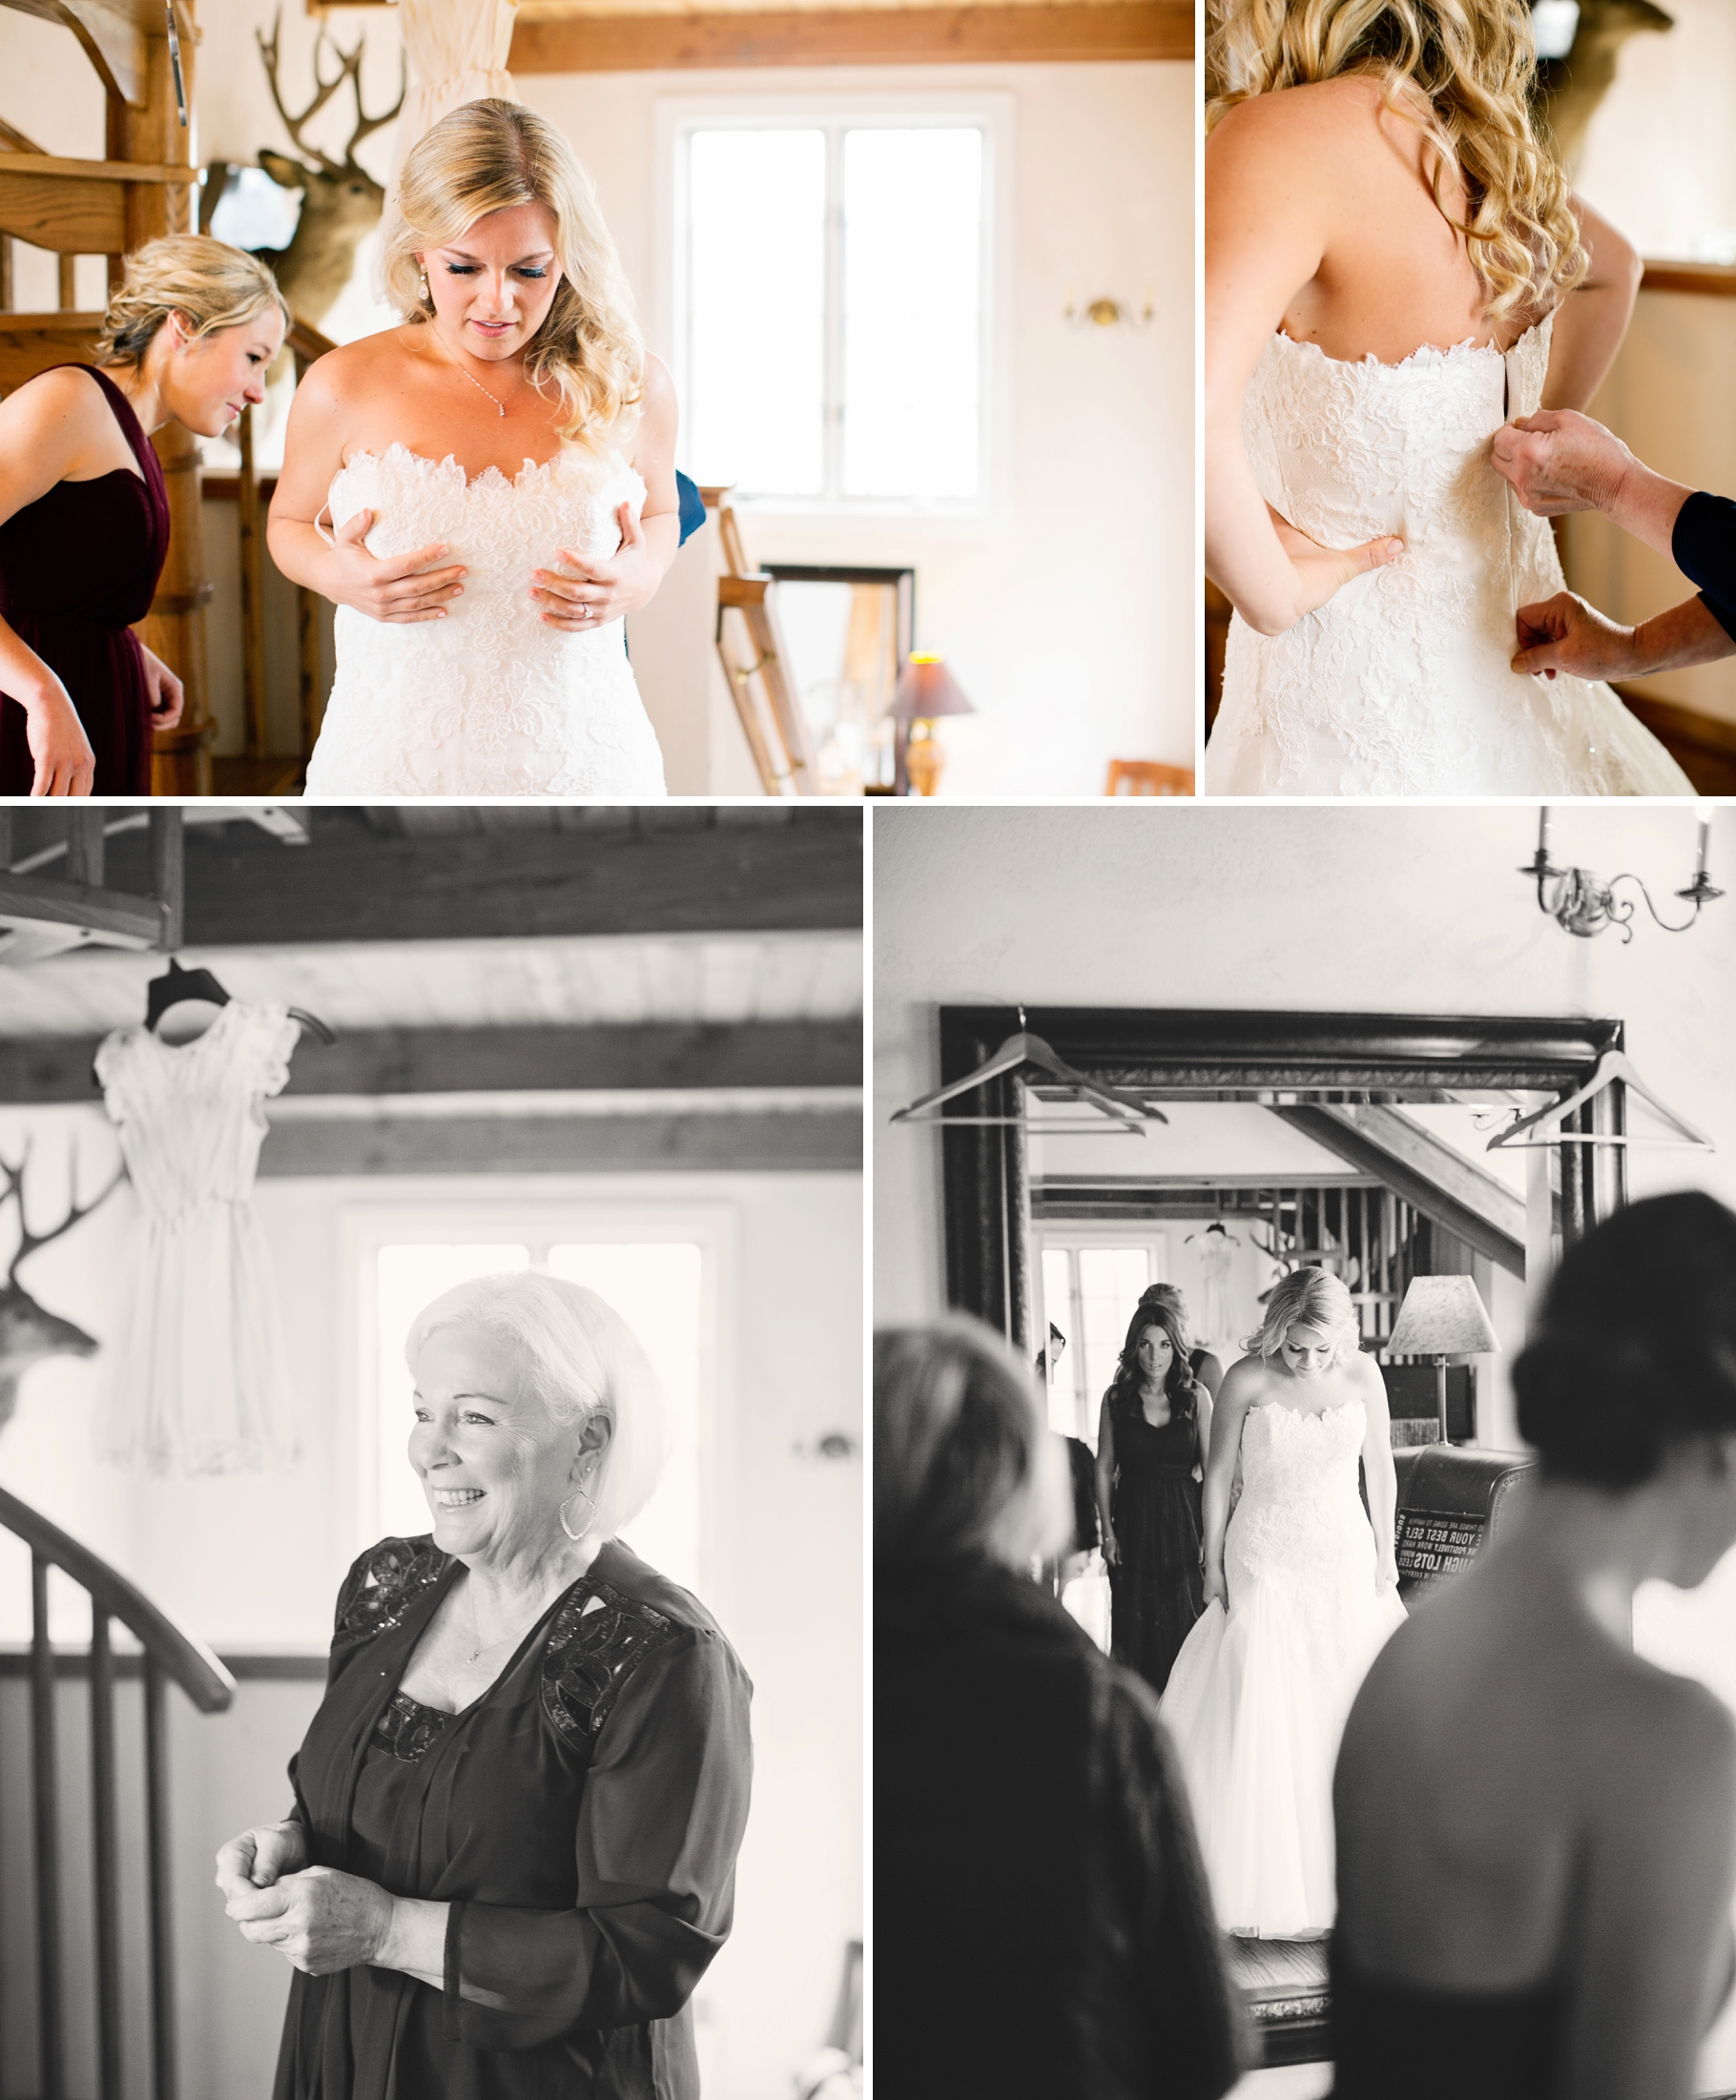 9-Getting-Ready-Brides-Dress-Delille-Cellars-Chateau-Vineyard-Woodinville-Wedding-Photographer-Photography-by-Betty-Elaine